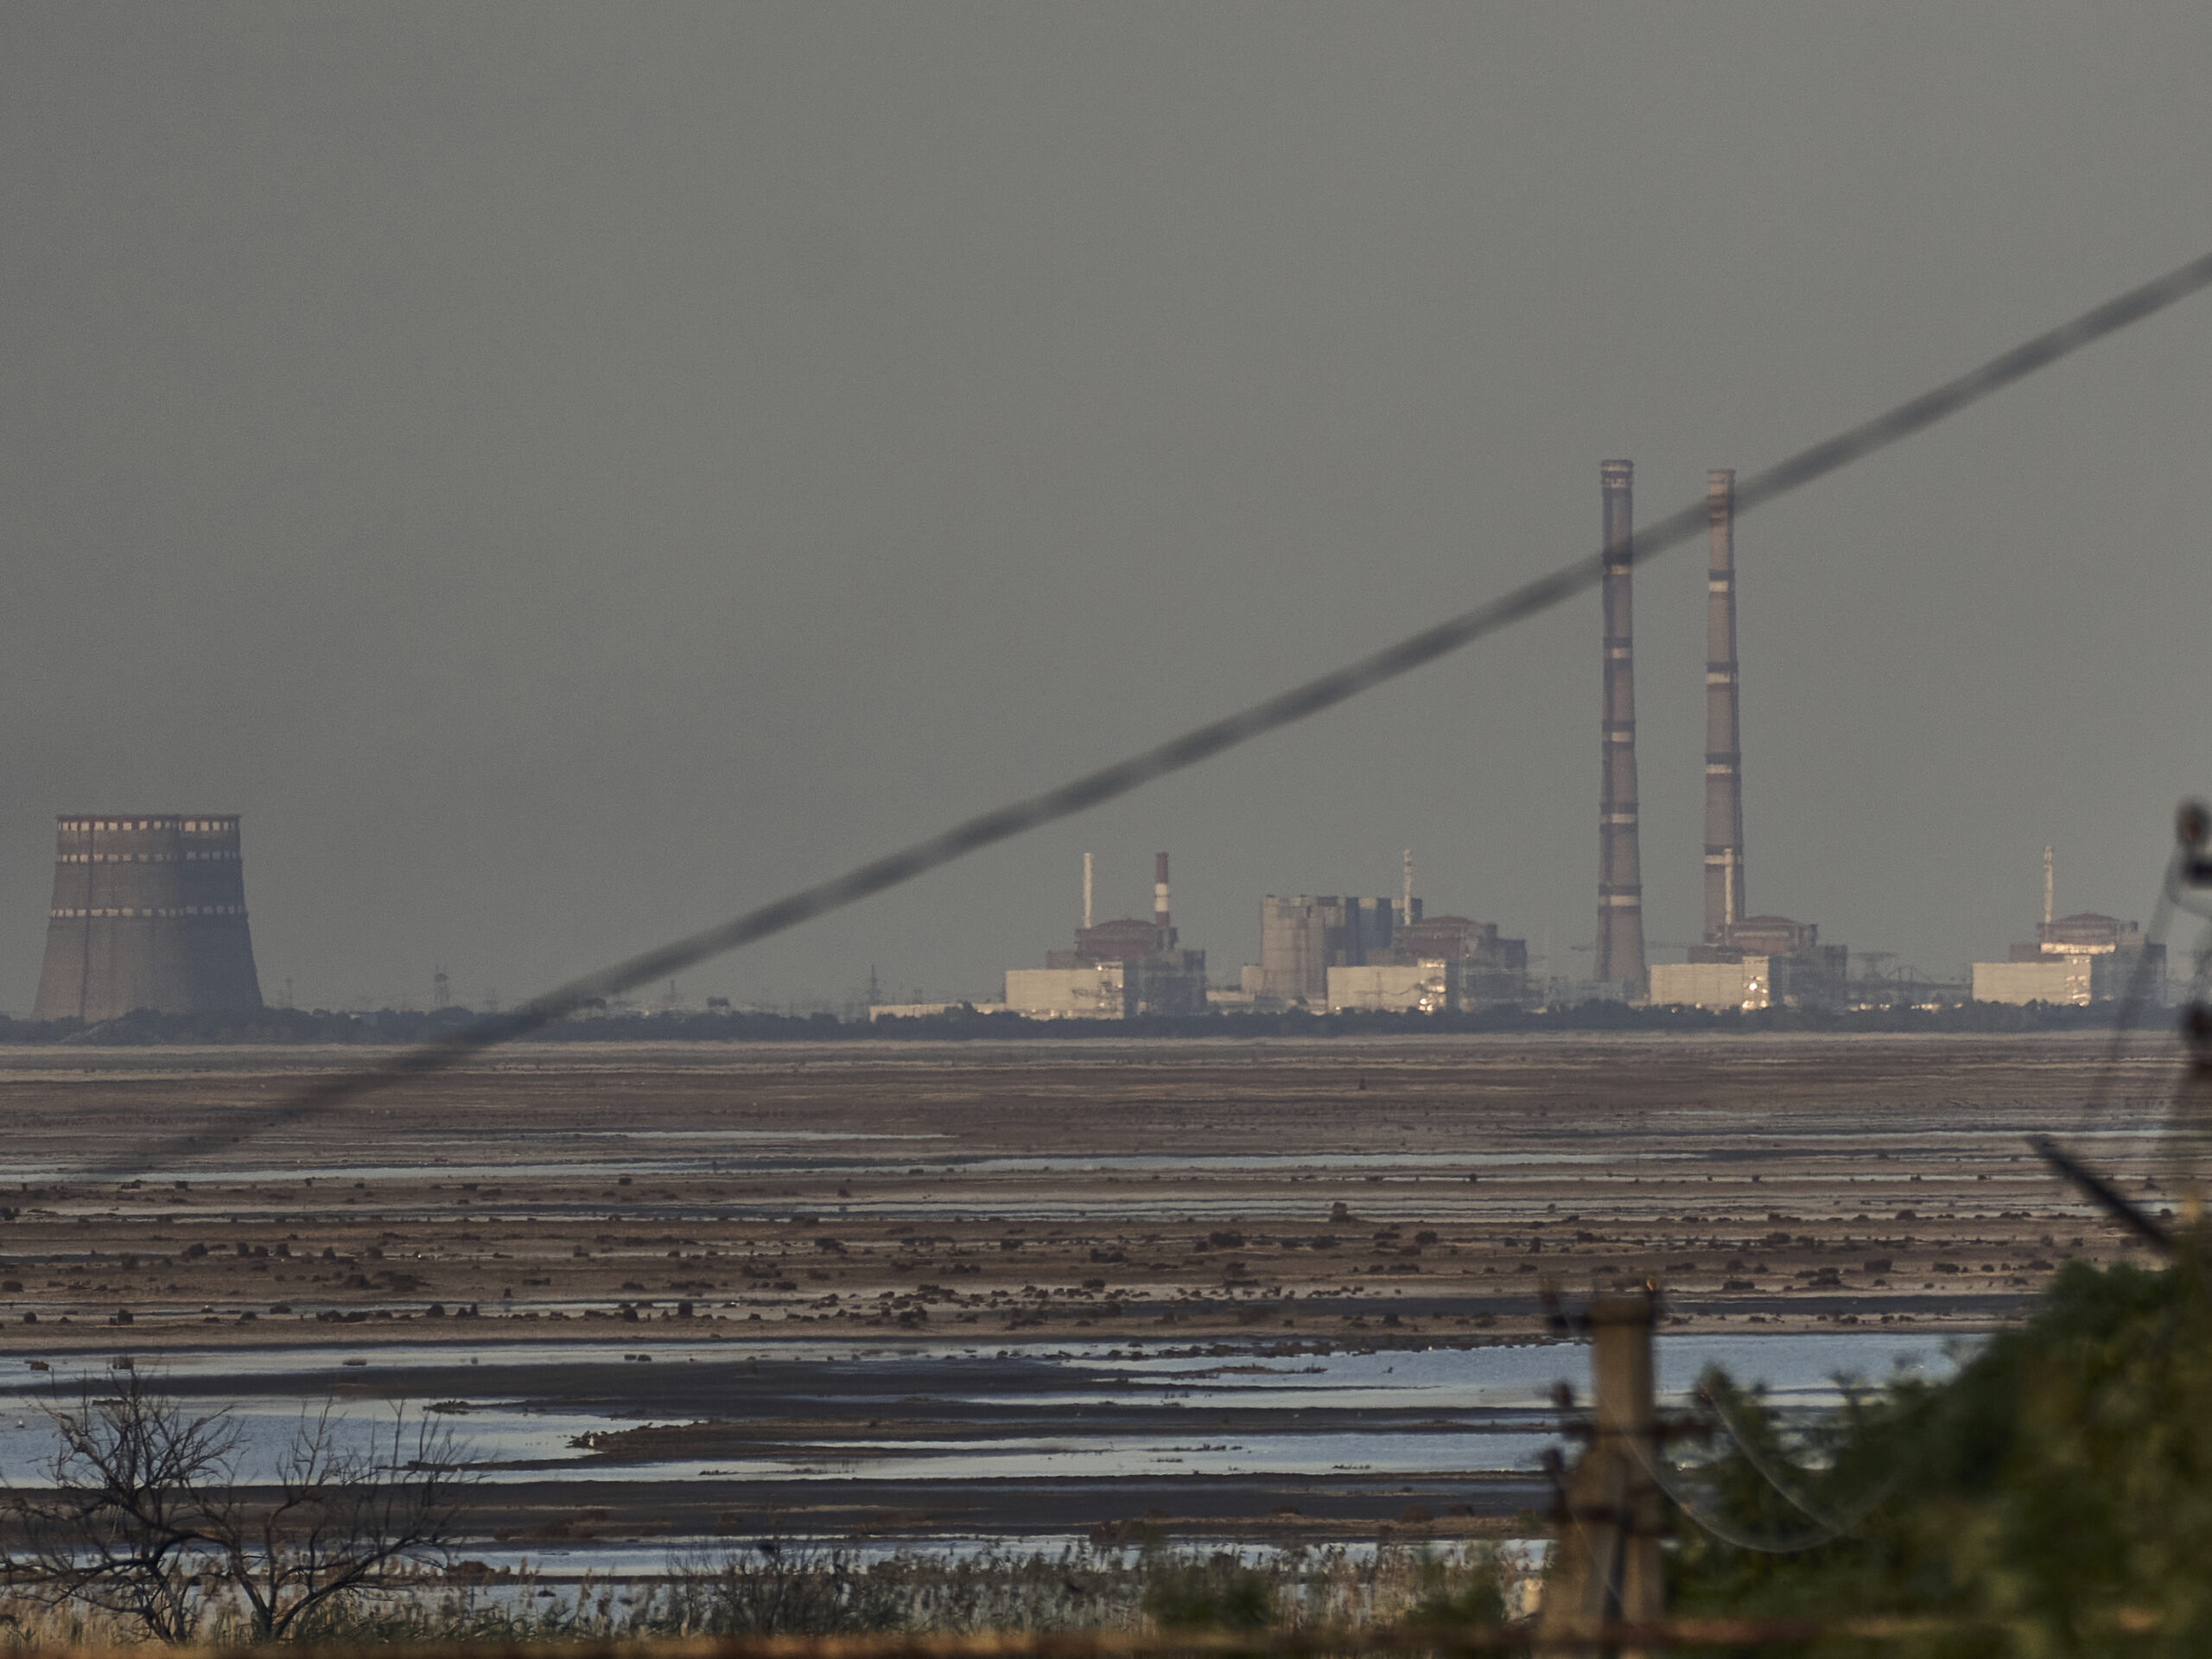 The Zaporizhzhia nuclear power plant, Europe's largest, is seen in the background of the shallow Kakhovka Reservoir after the dam collapse, in Energodar, Russian-occupied Ukraine, Tuesday, June 27, 2023.